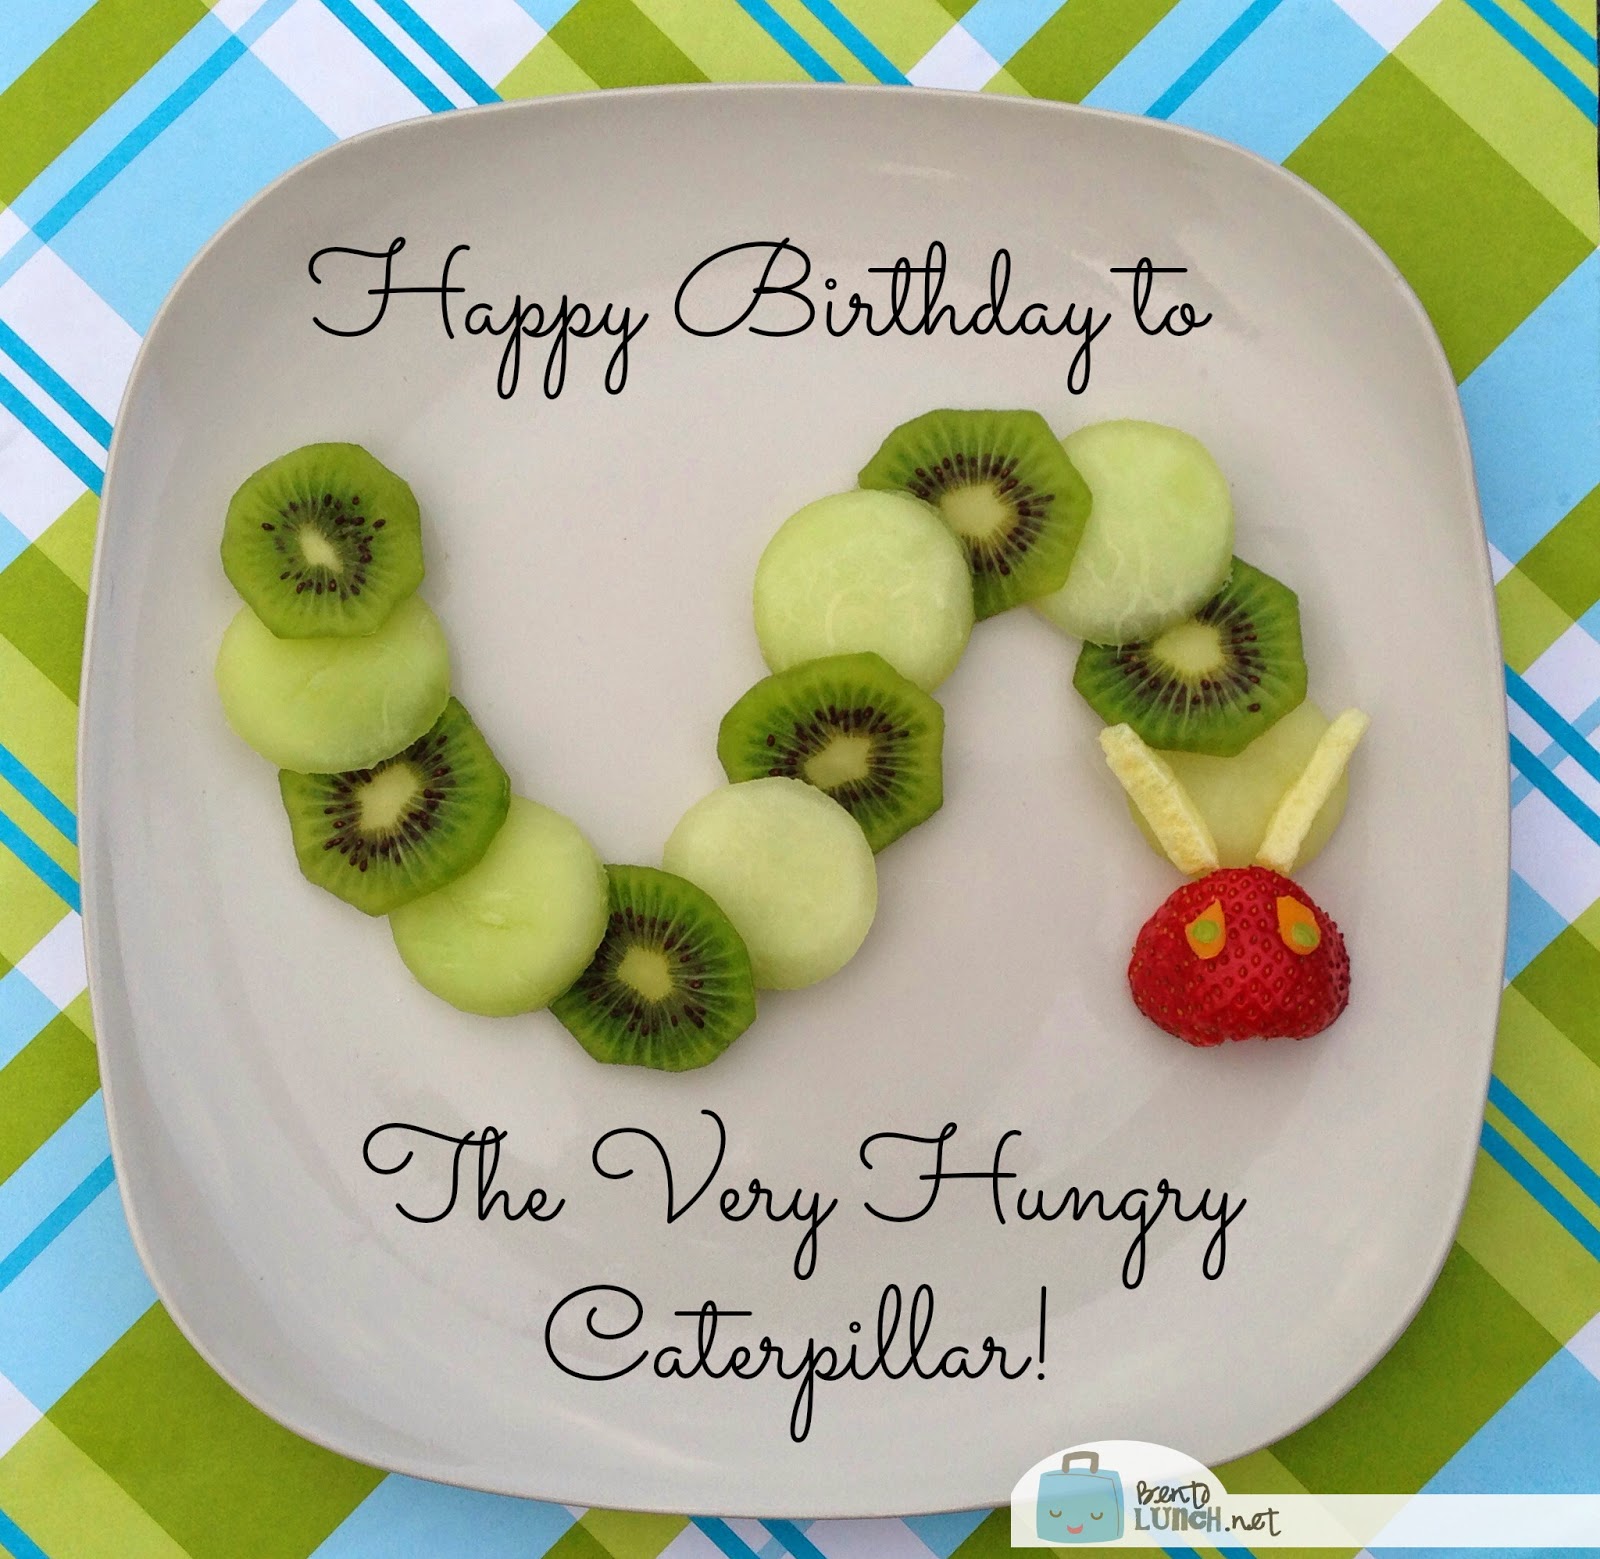 The Very Hungry Caterpillar Snack